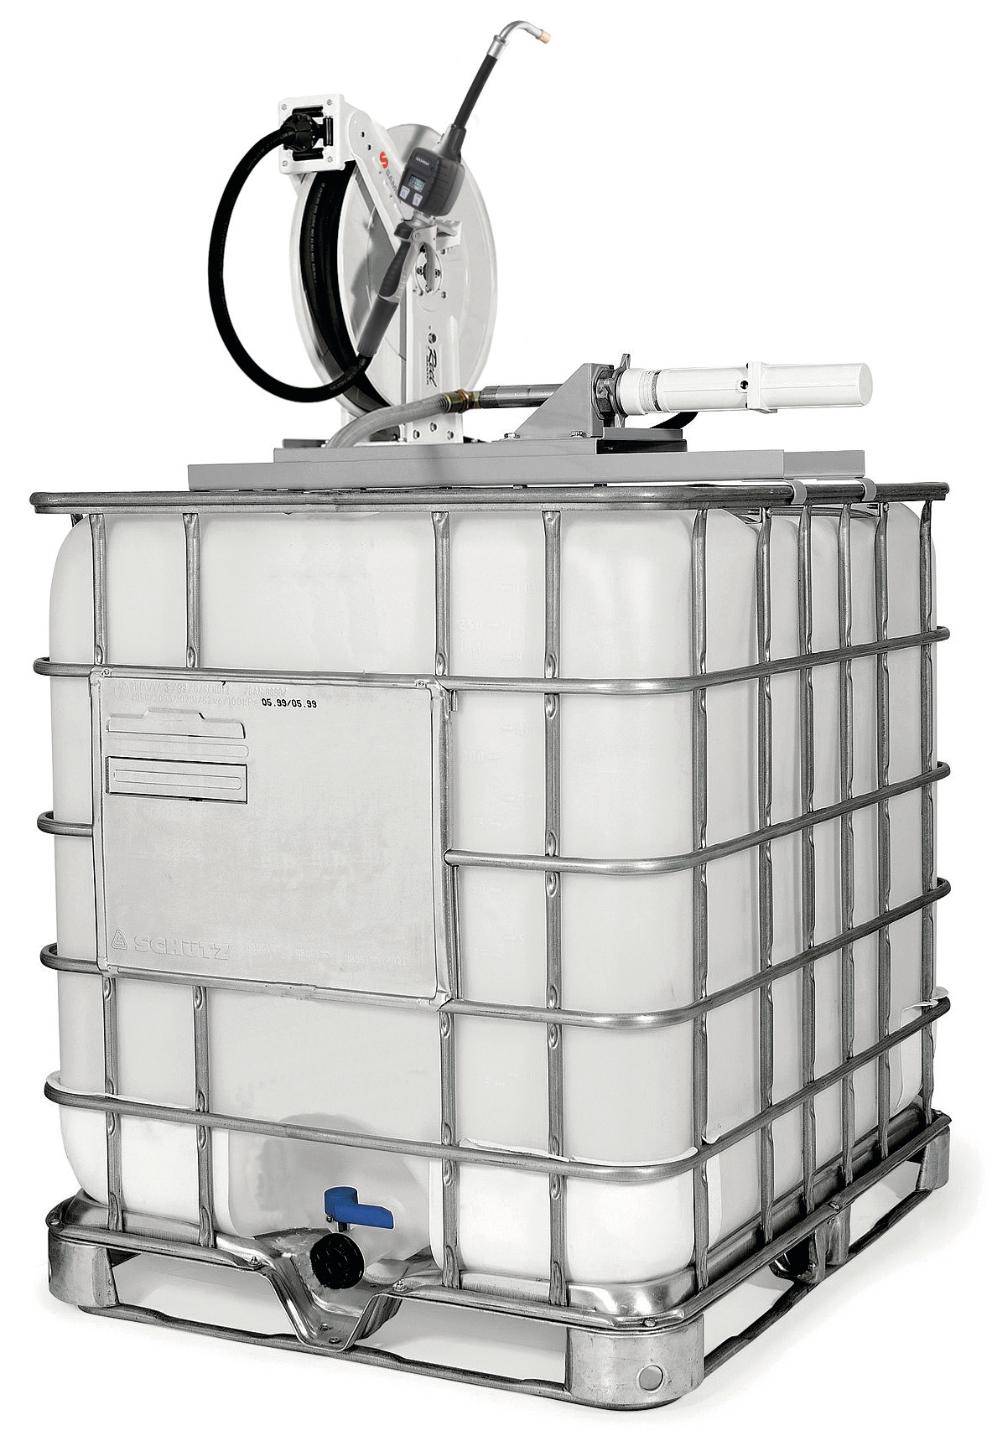 PUMPMASTER 2 - 3:1 RATIO OIL PNEUMATIC PUMP, 1.000 L IBC, TOP MOUNTED STATIONARY PACKAGE WITH RM-12 REEL